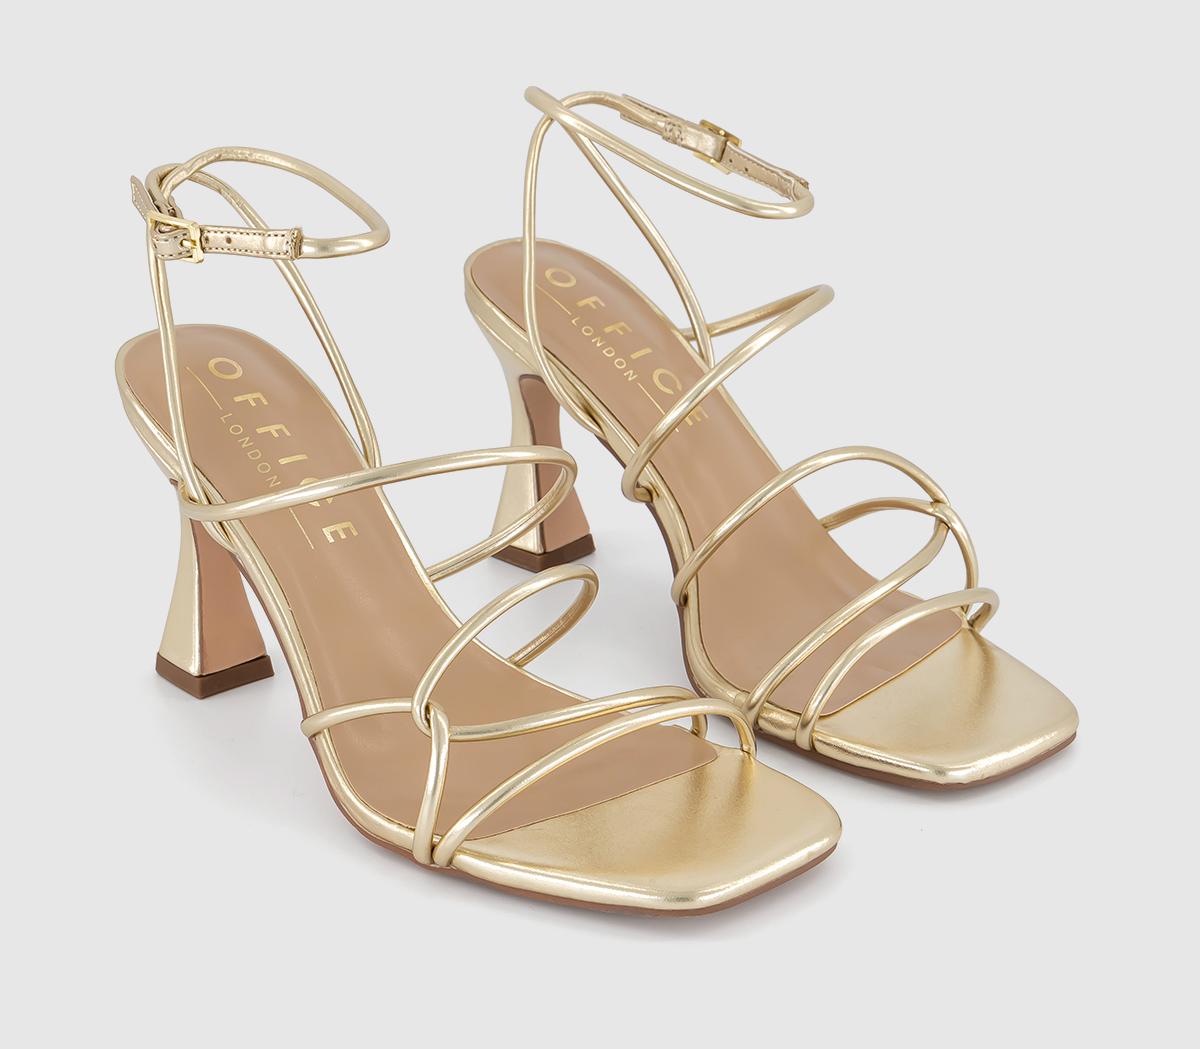 OFFICE Womens Million Dollar Strappy Sandals Gold, 5